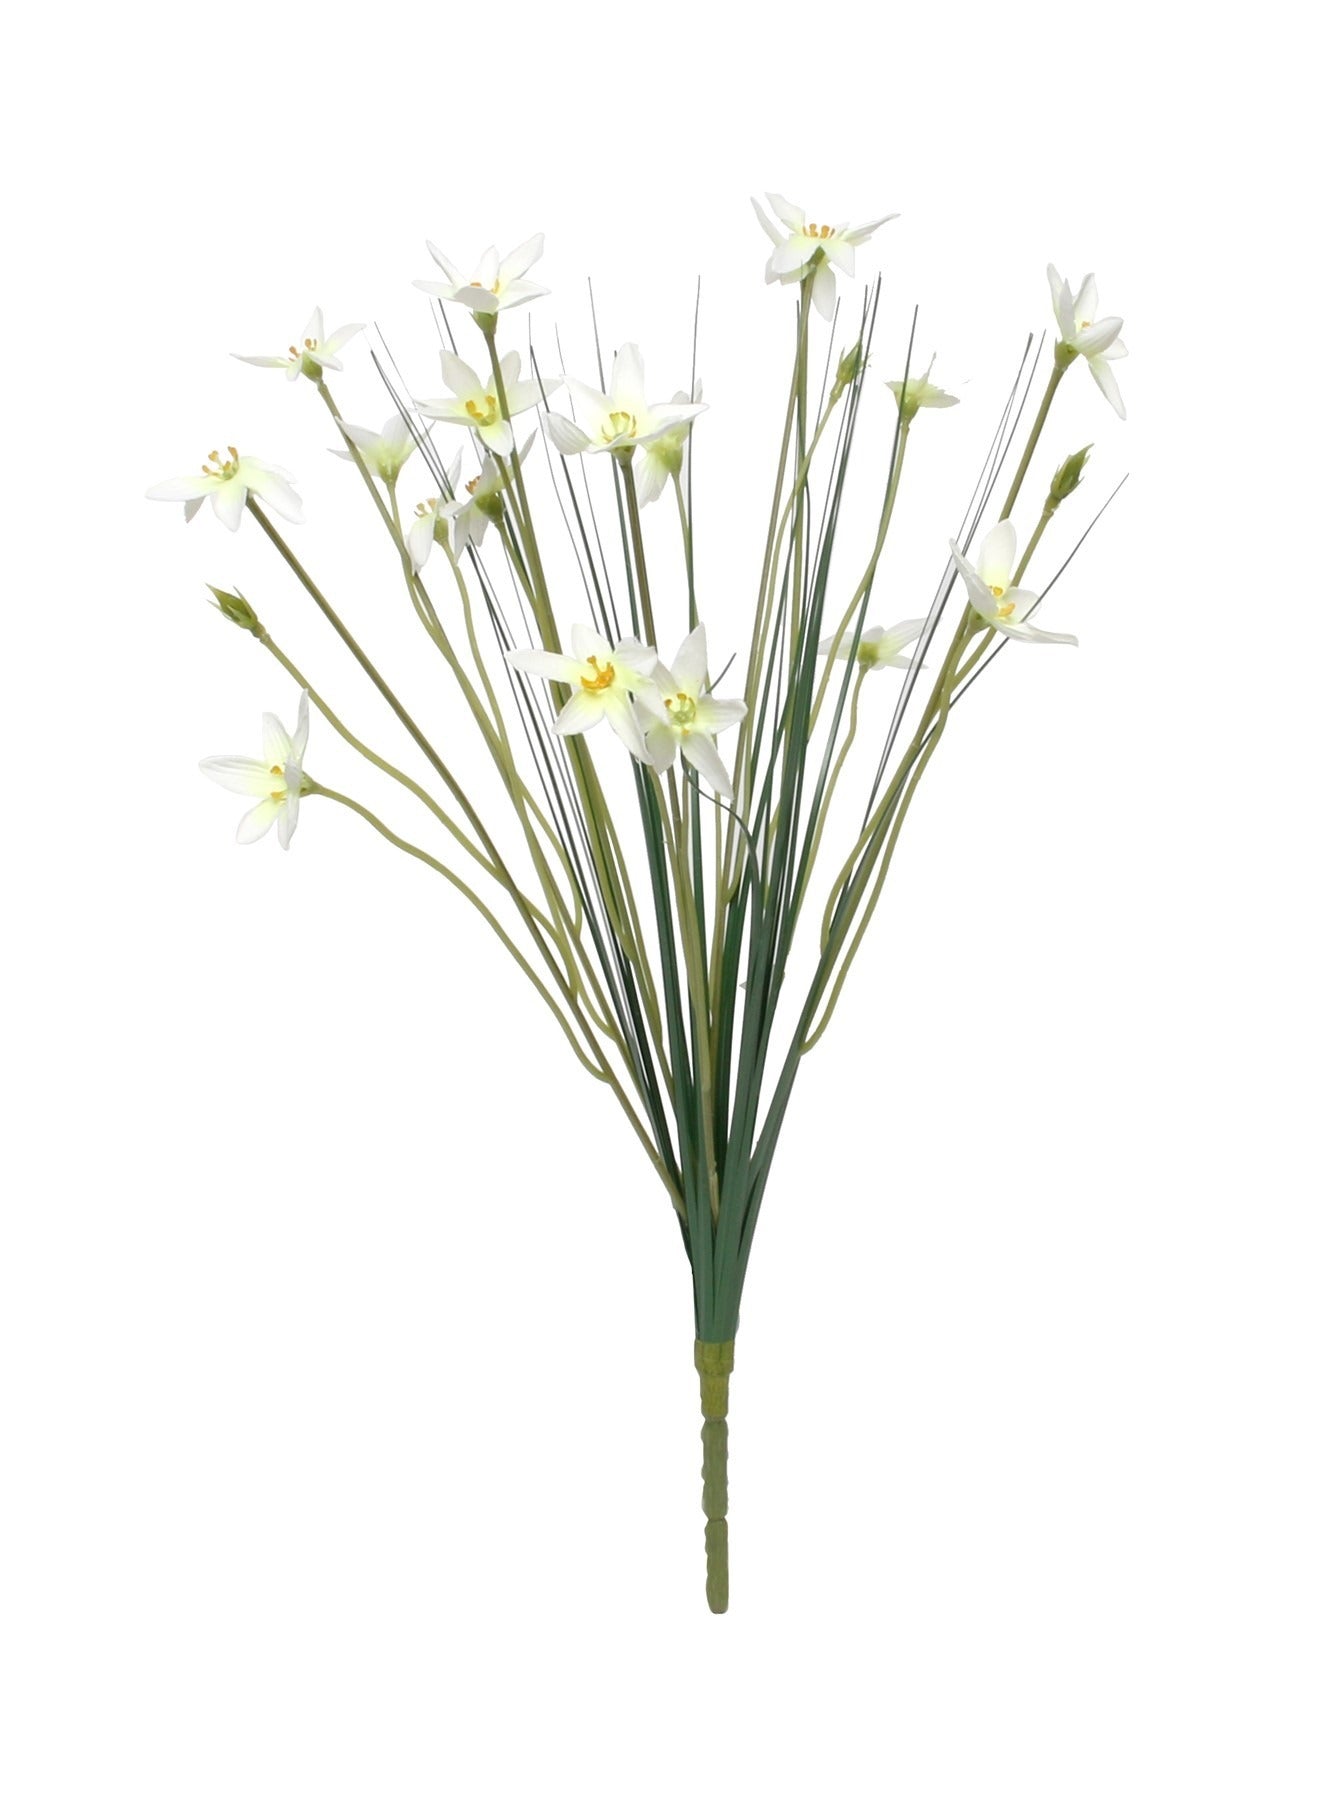 View Zephyranthes Candida Bush 17inch information